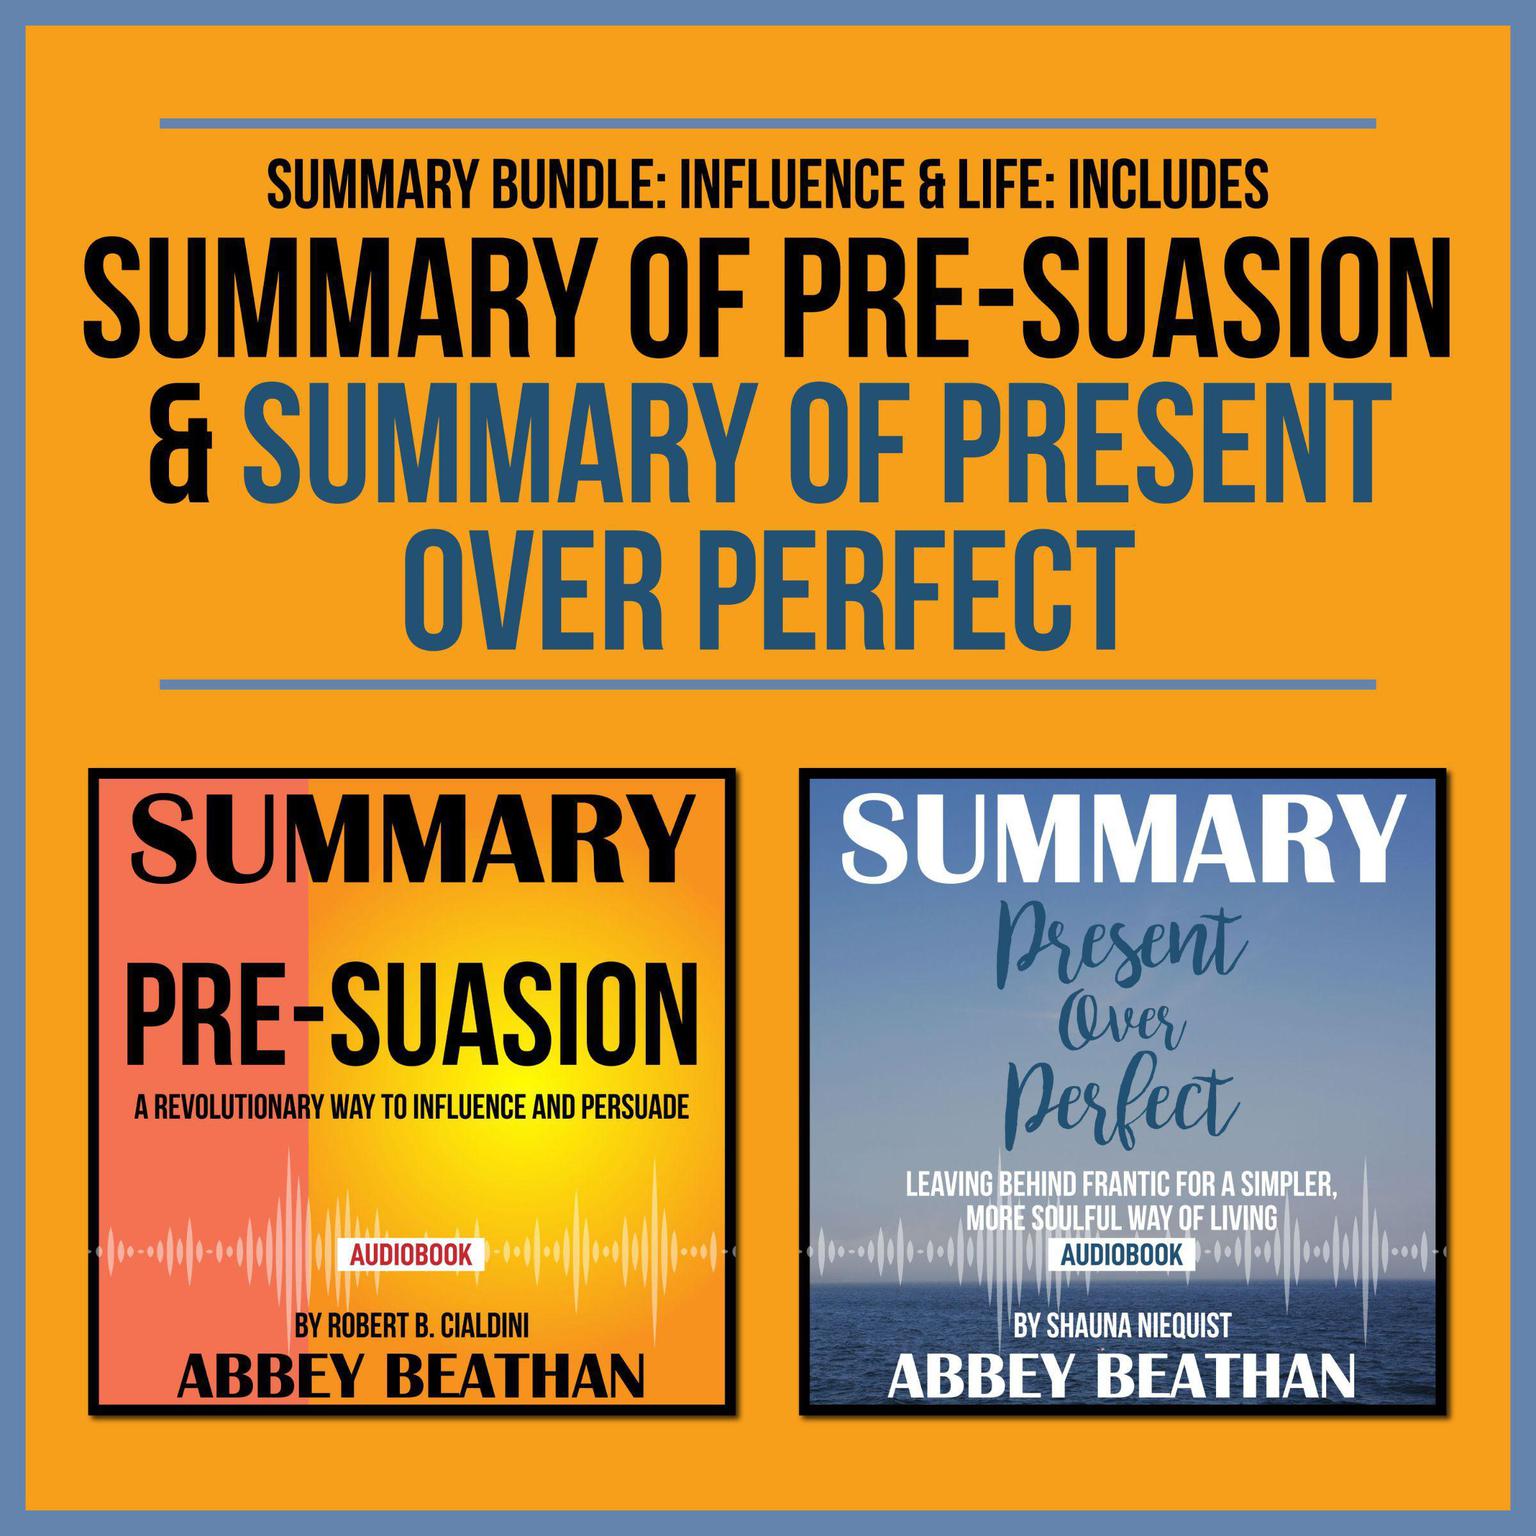 Summary Bundle: Influence & Life: Includes Summary of Pre-Suasion & Summary of Present Over Perfect Audiobook, by Abbey Beathan